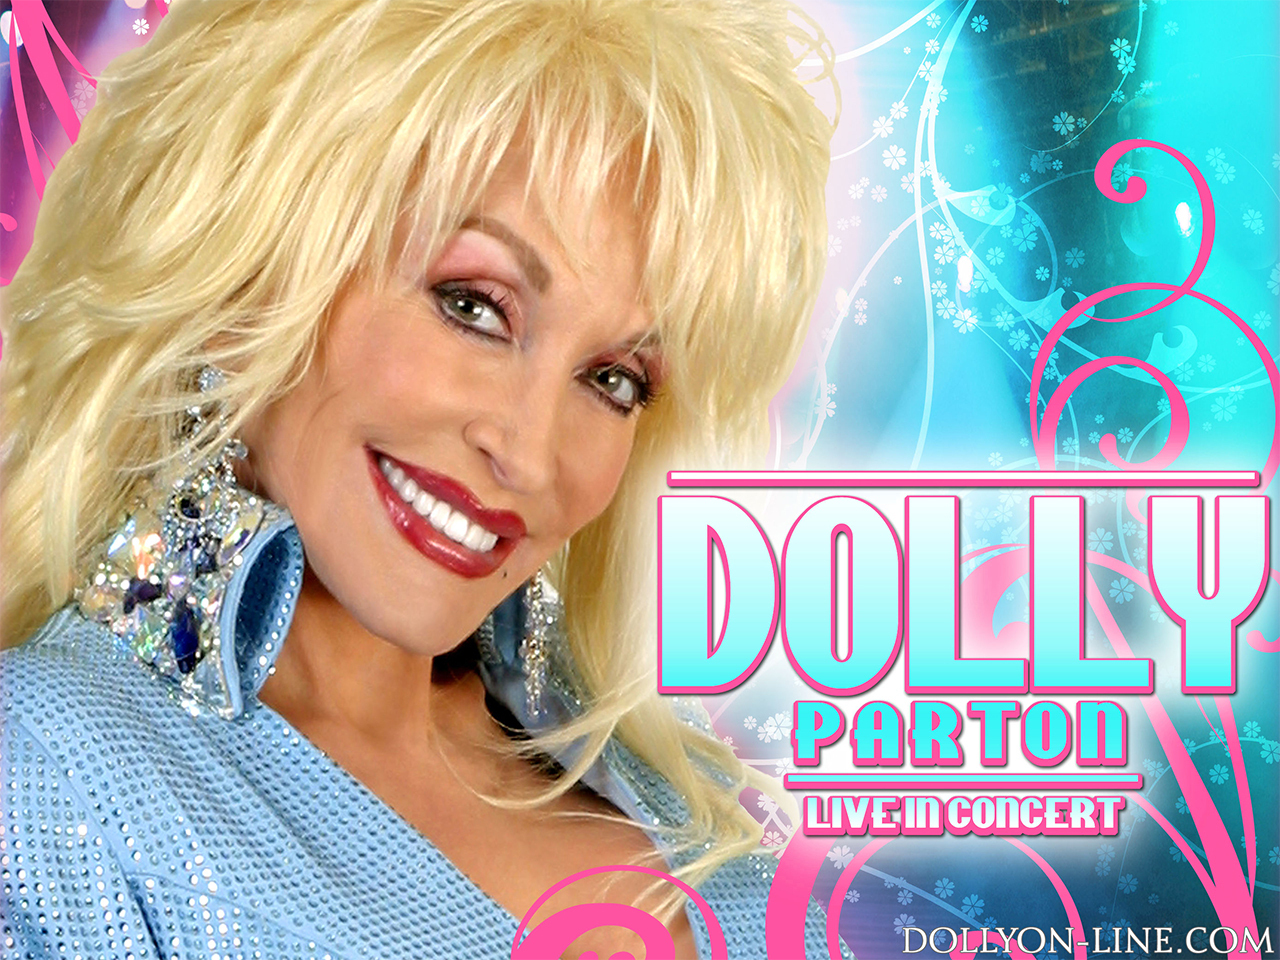 Dolly Parton Image HD Wallpaper And Background Photos